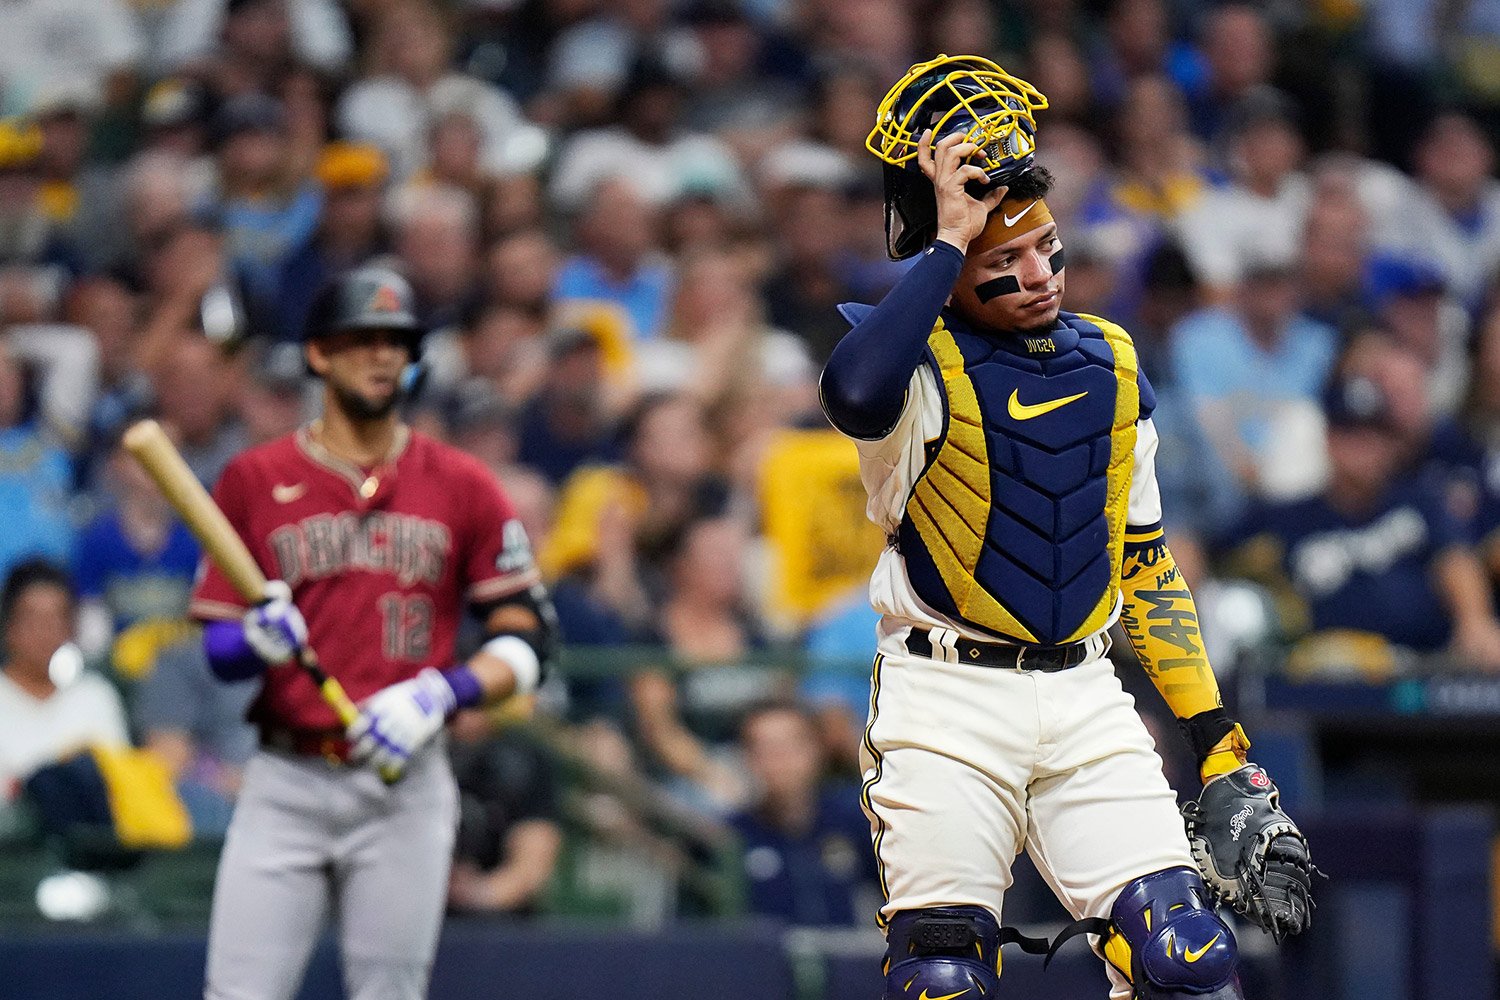 Frelick's Exceptional Debut Performance Helps Brewers Rally to